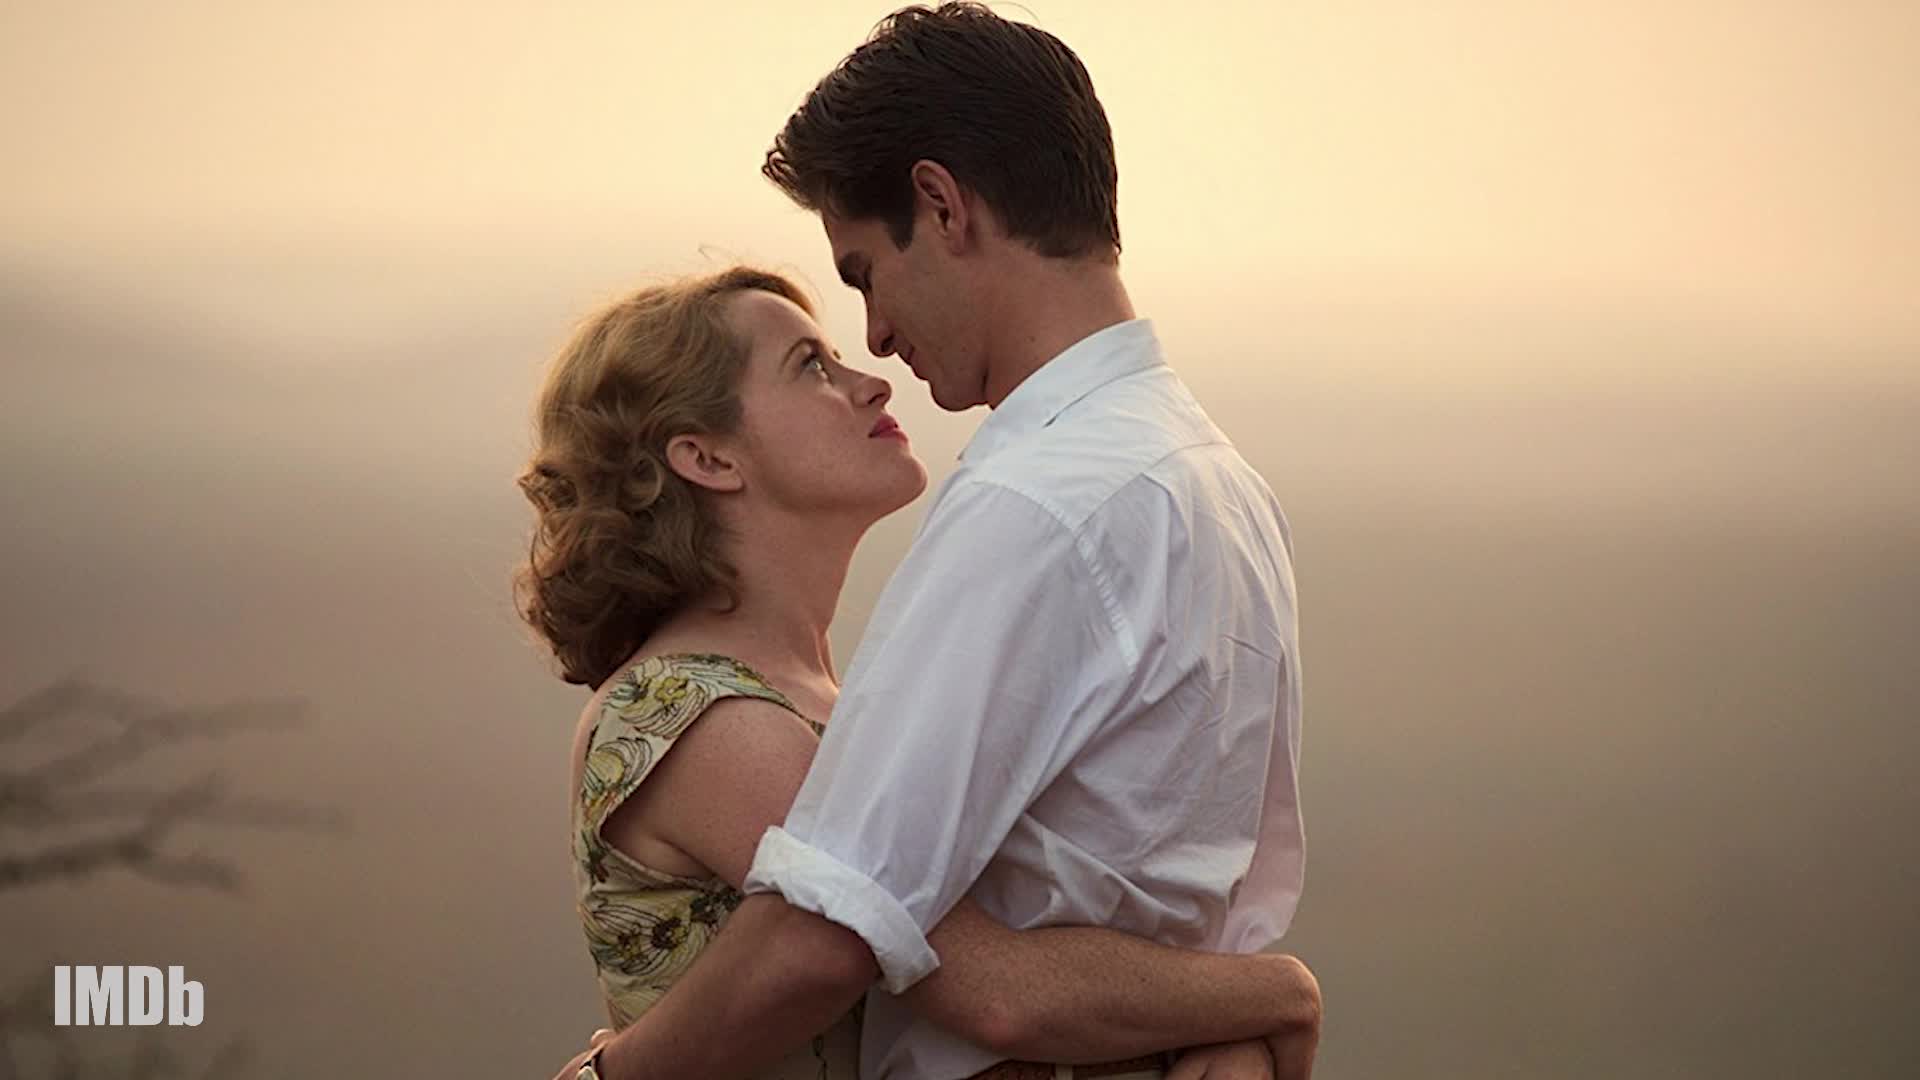 Andrew Garfield On His On Screen Intimacy With Claire Foy In 'Breathe'